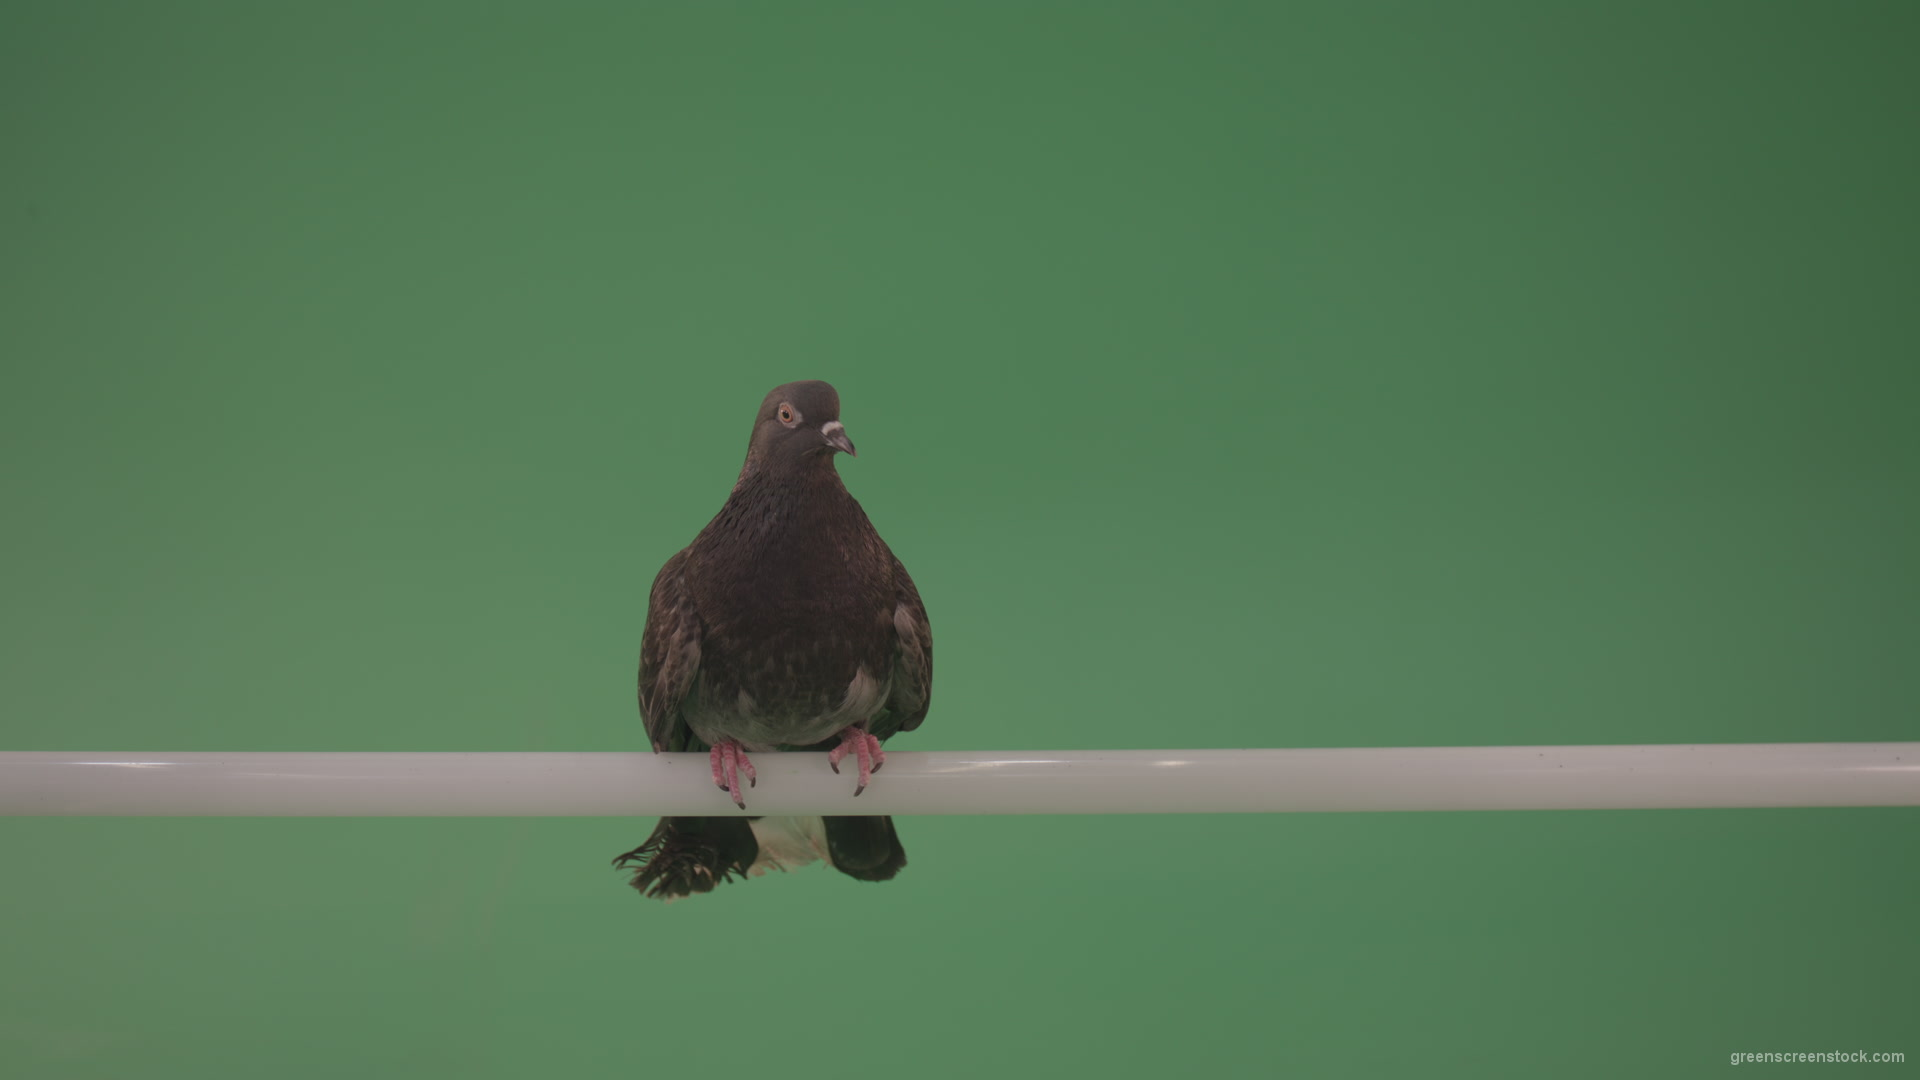 City-bird-of-a-dove-sitting-on-a-branch-in-the-city-isolated-on-green-background_009 Green Screen Stock